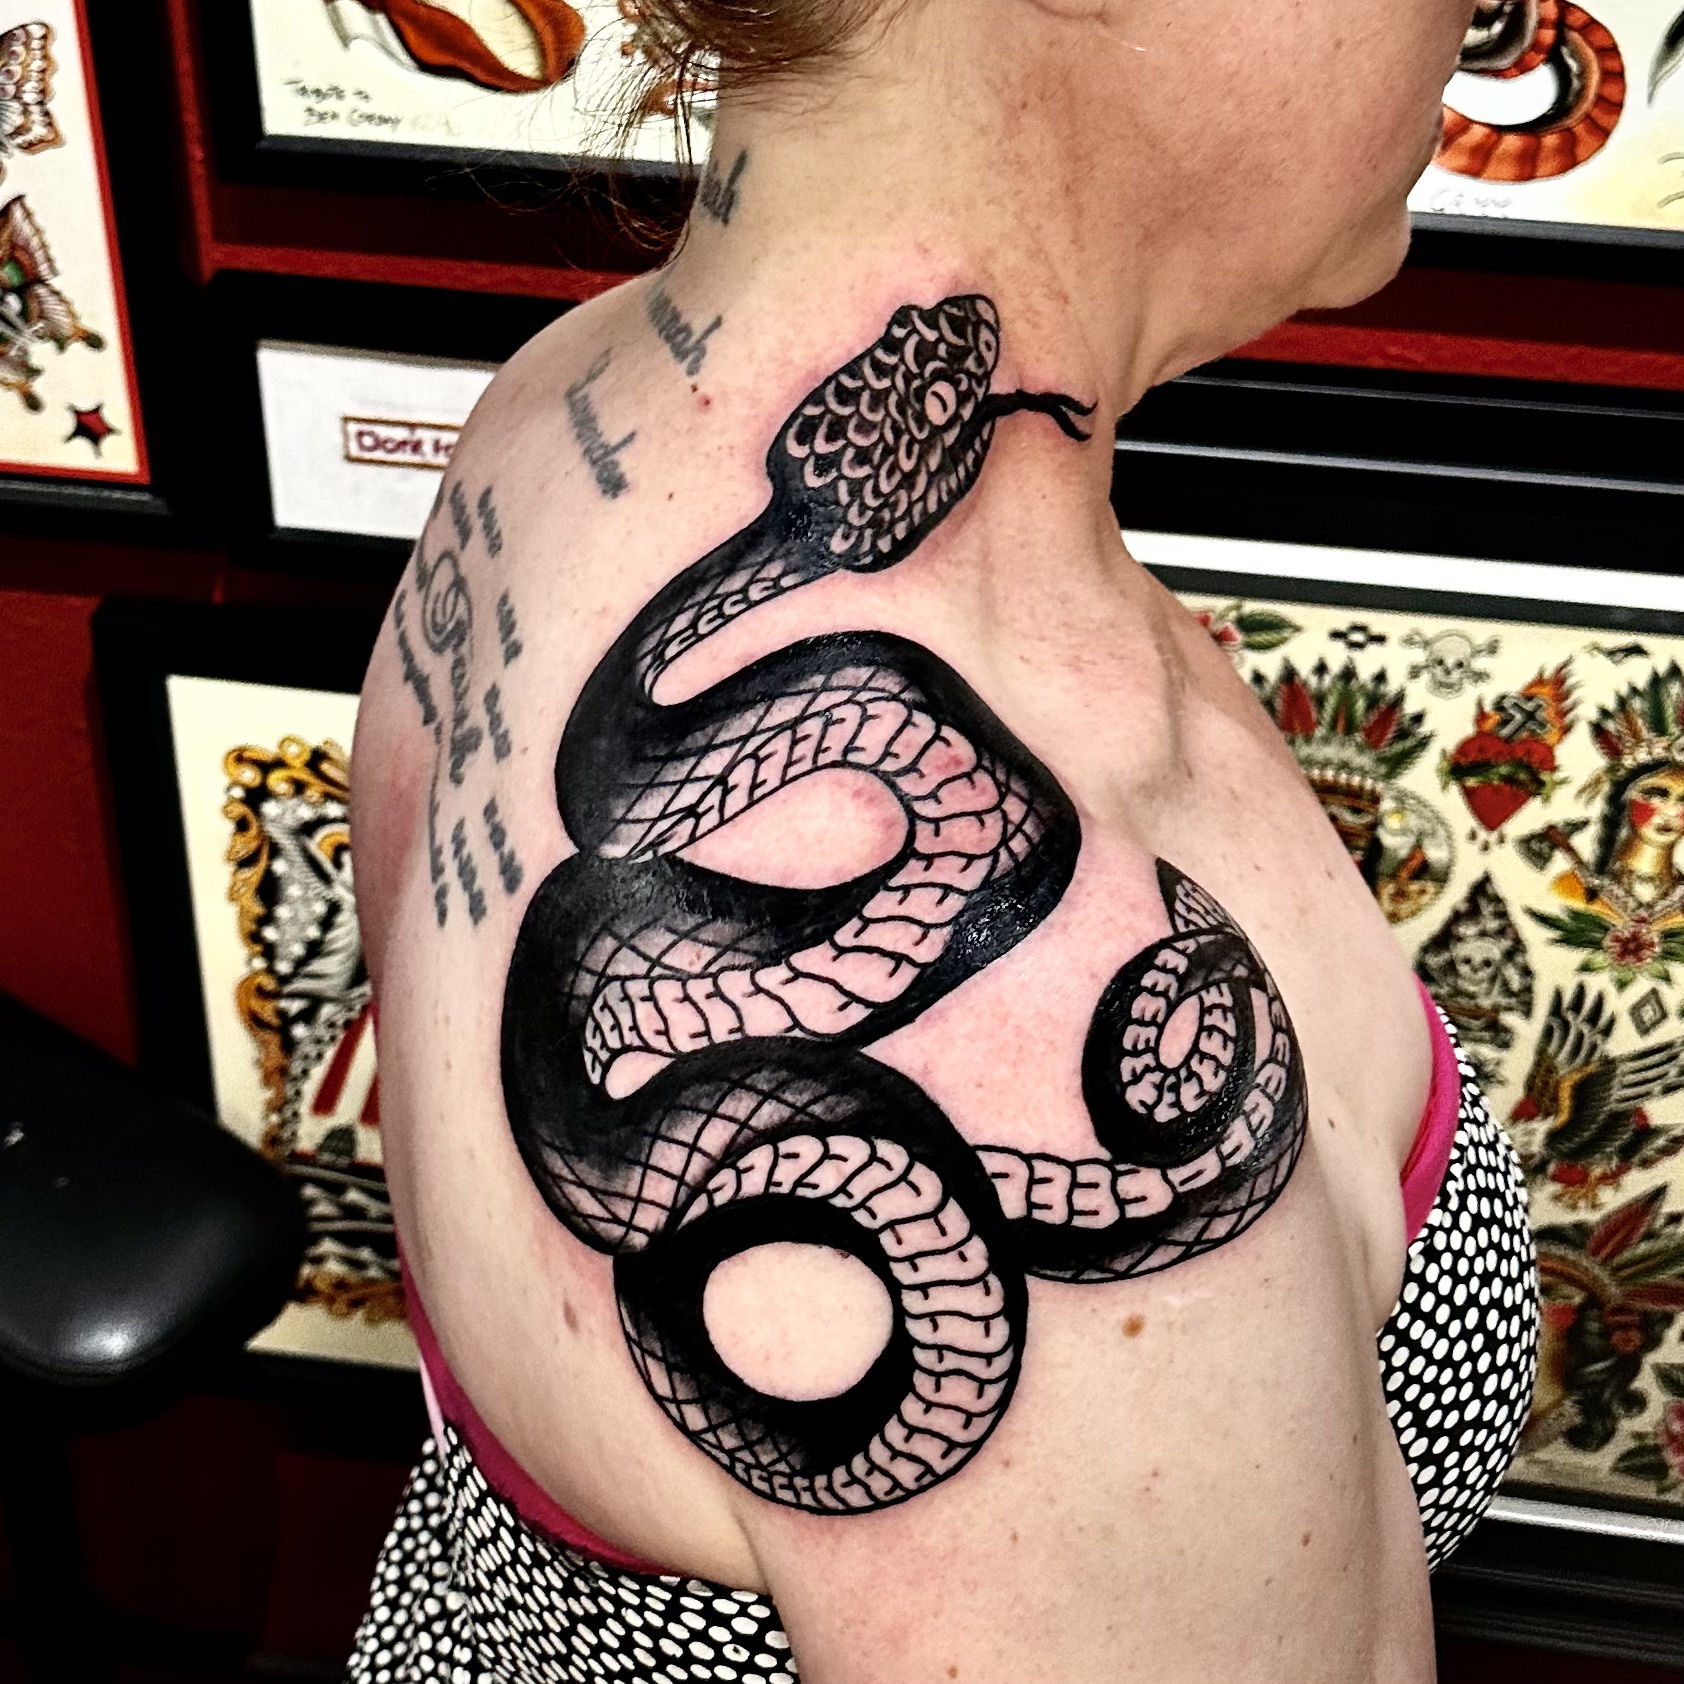 Tattoo of a snake on a woman's neck